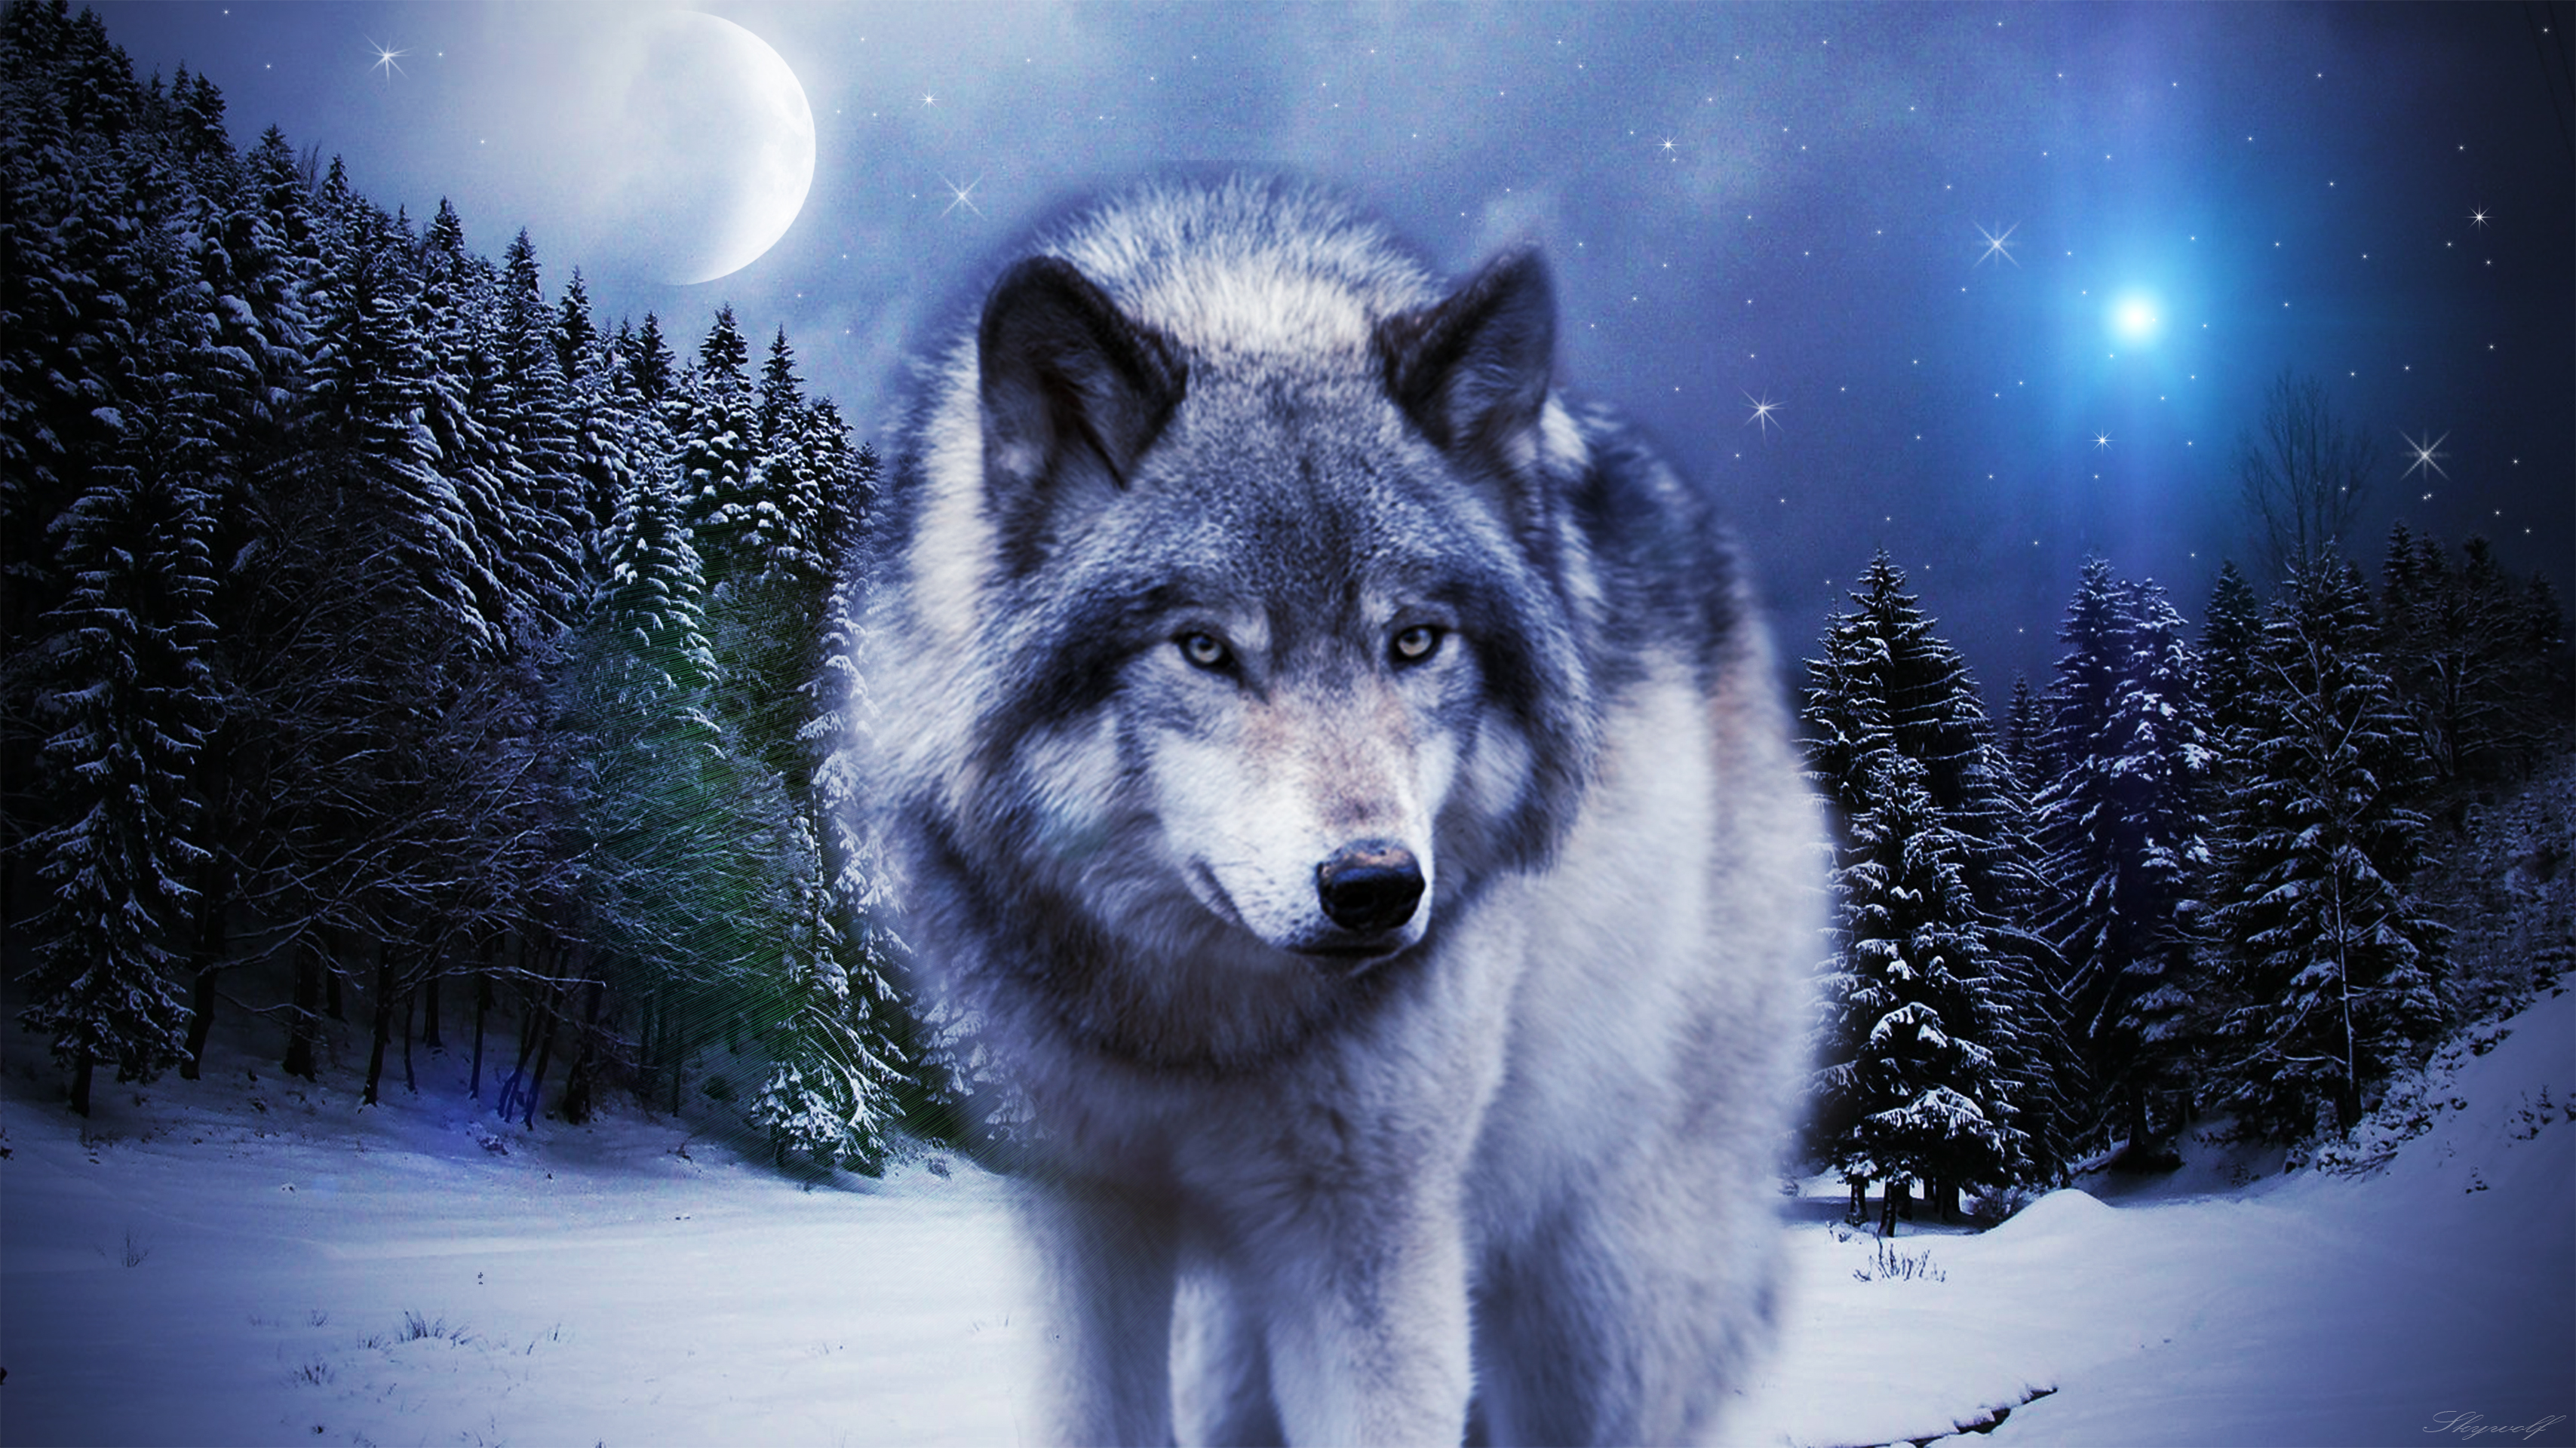 10 Best images about Wolves on Pinterest | Gray wolf, Wallpapers